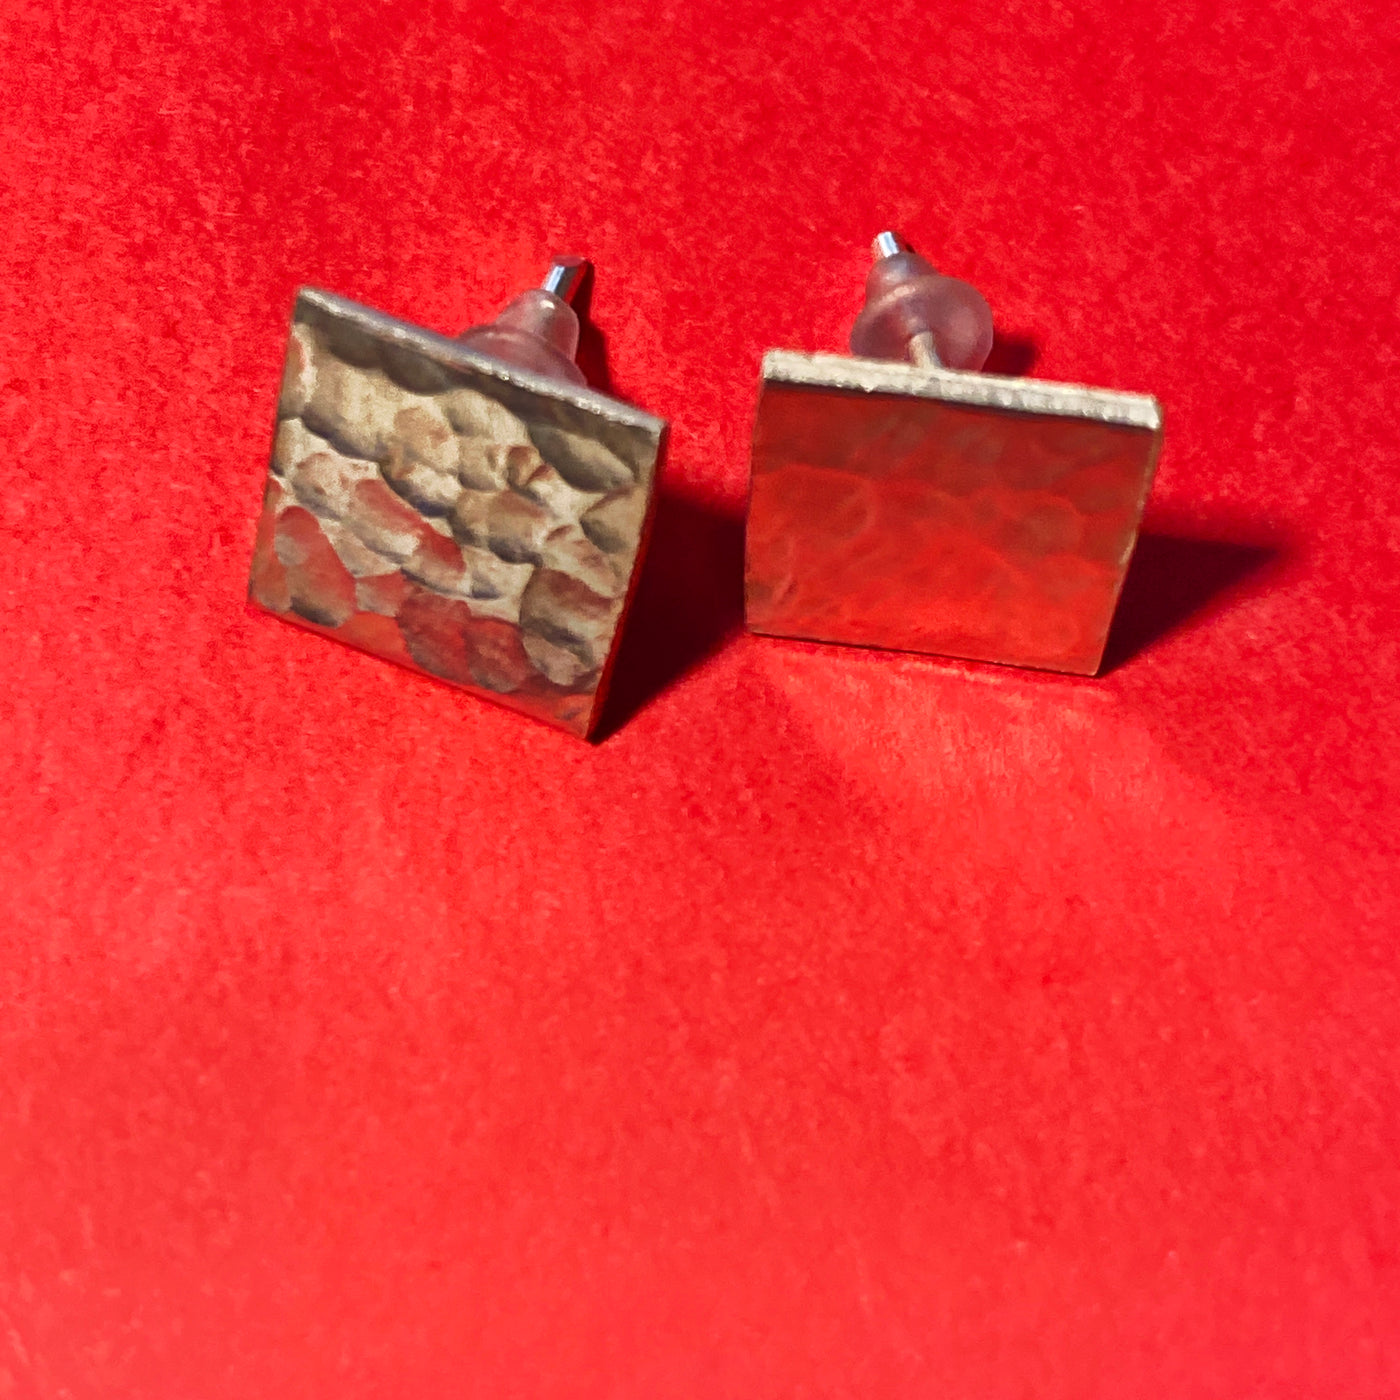 Square sterling silver studs textured 1 cm